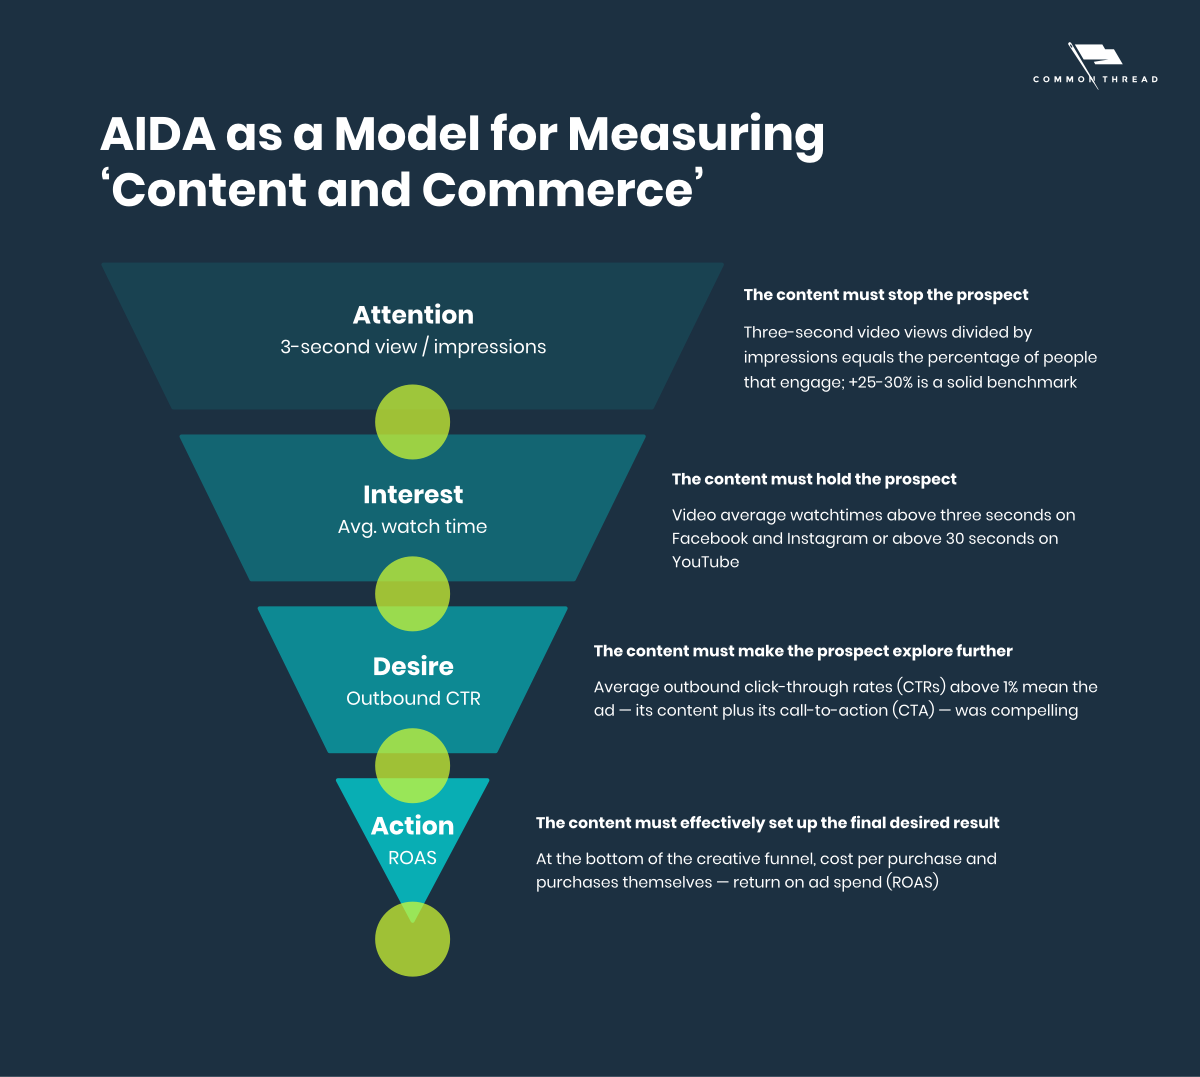 AIDA as a model for measuring 'content and commerce'